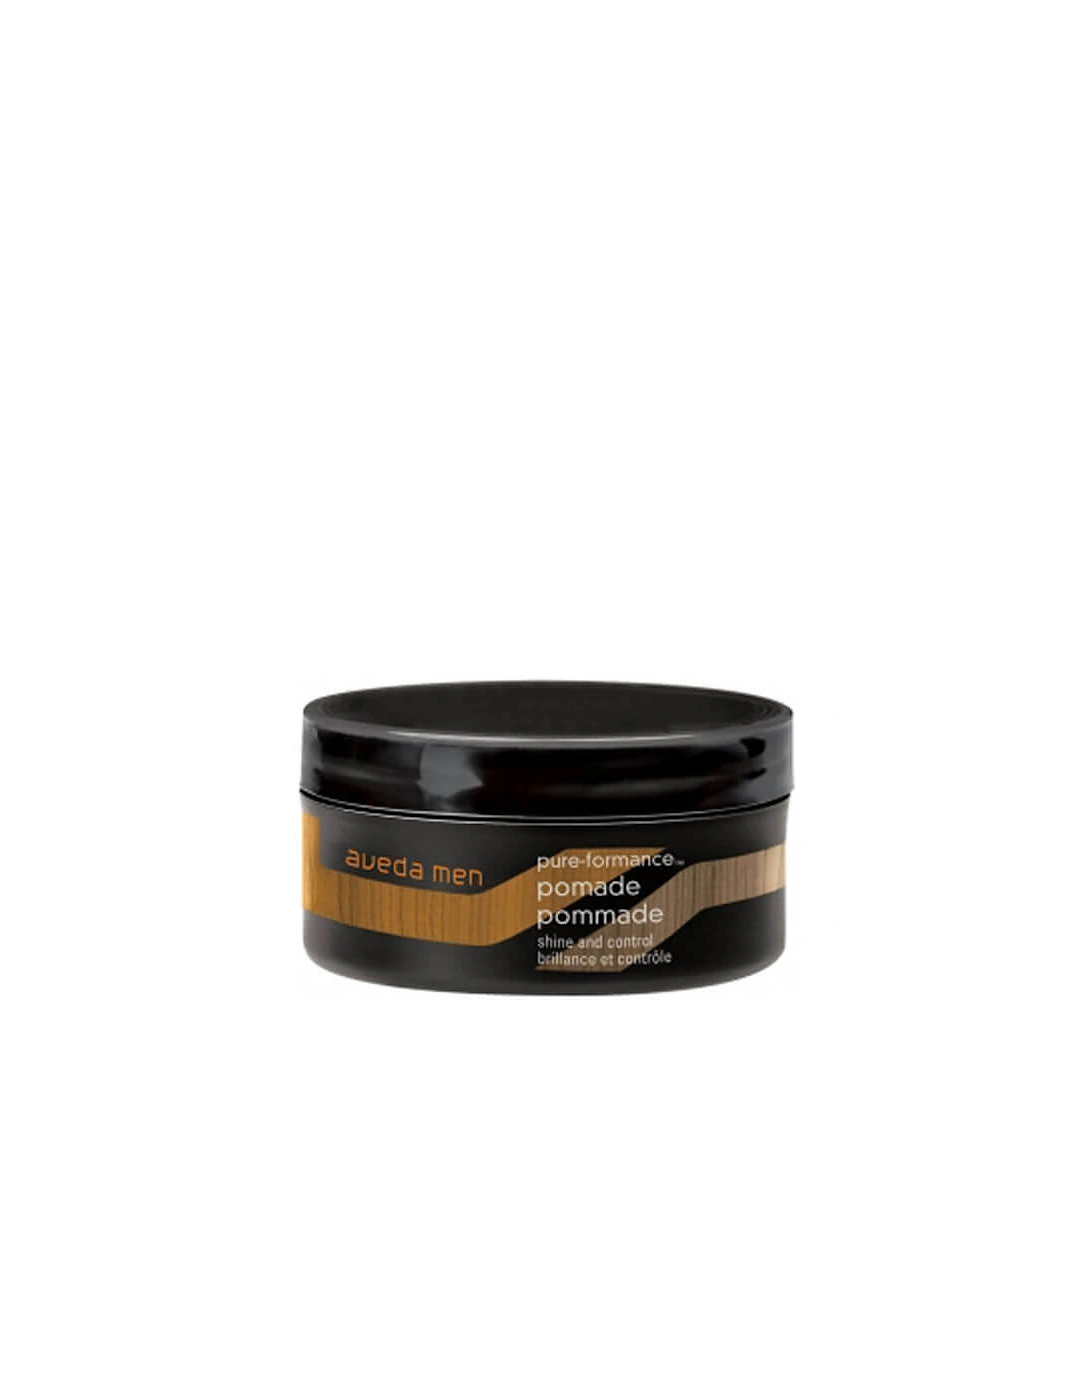 Men's Pure-Formance Pomade - Tub 75ml - Aveda, 2 of 1